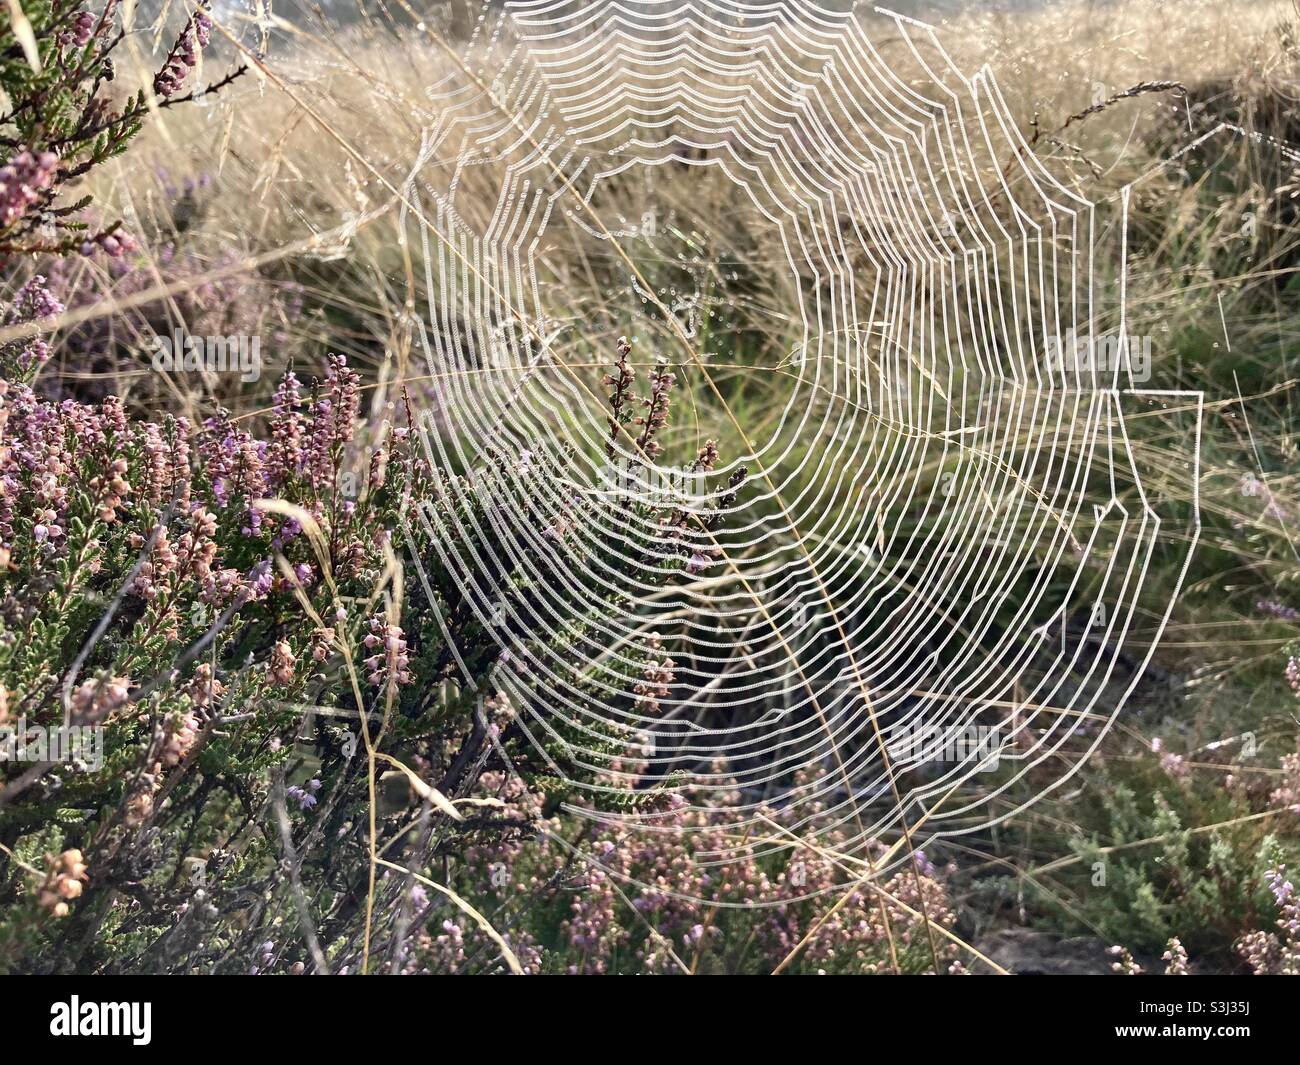 Close up of a spider’s web, in the pink flowering heather, glistening with dew in early morning sunshine. Stock Photo